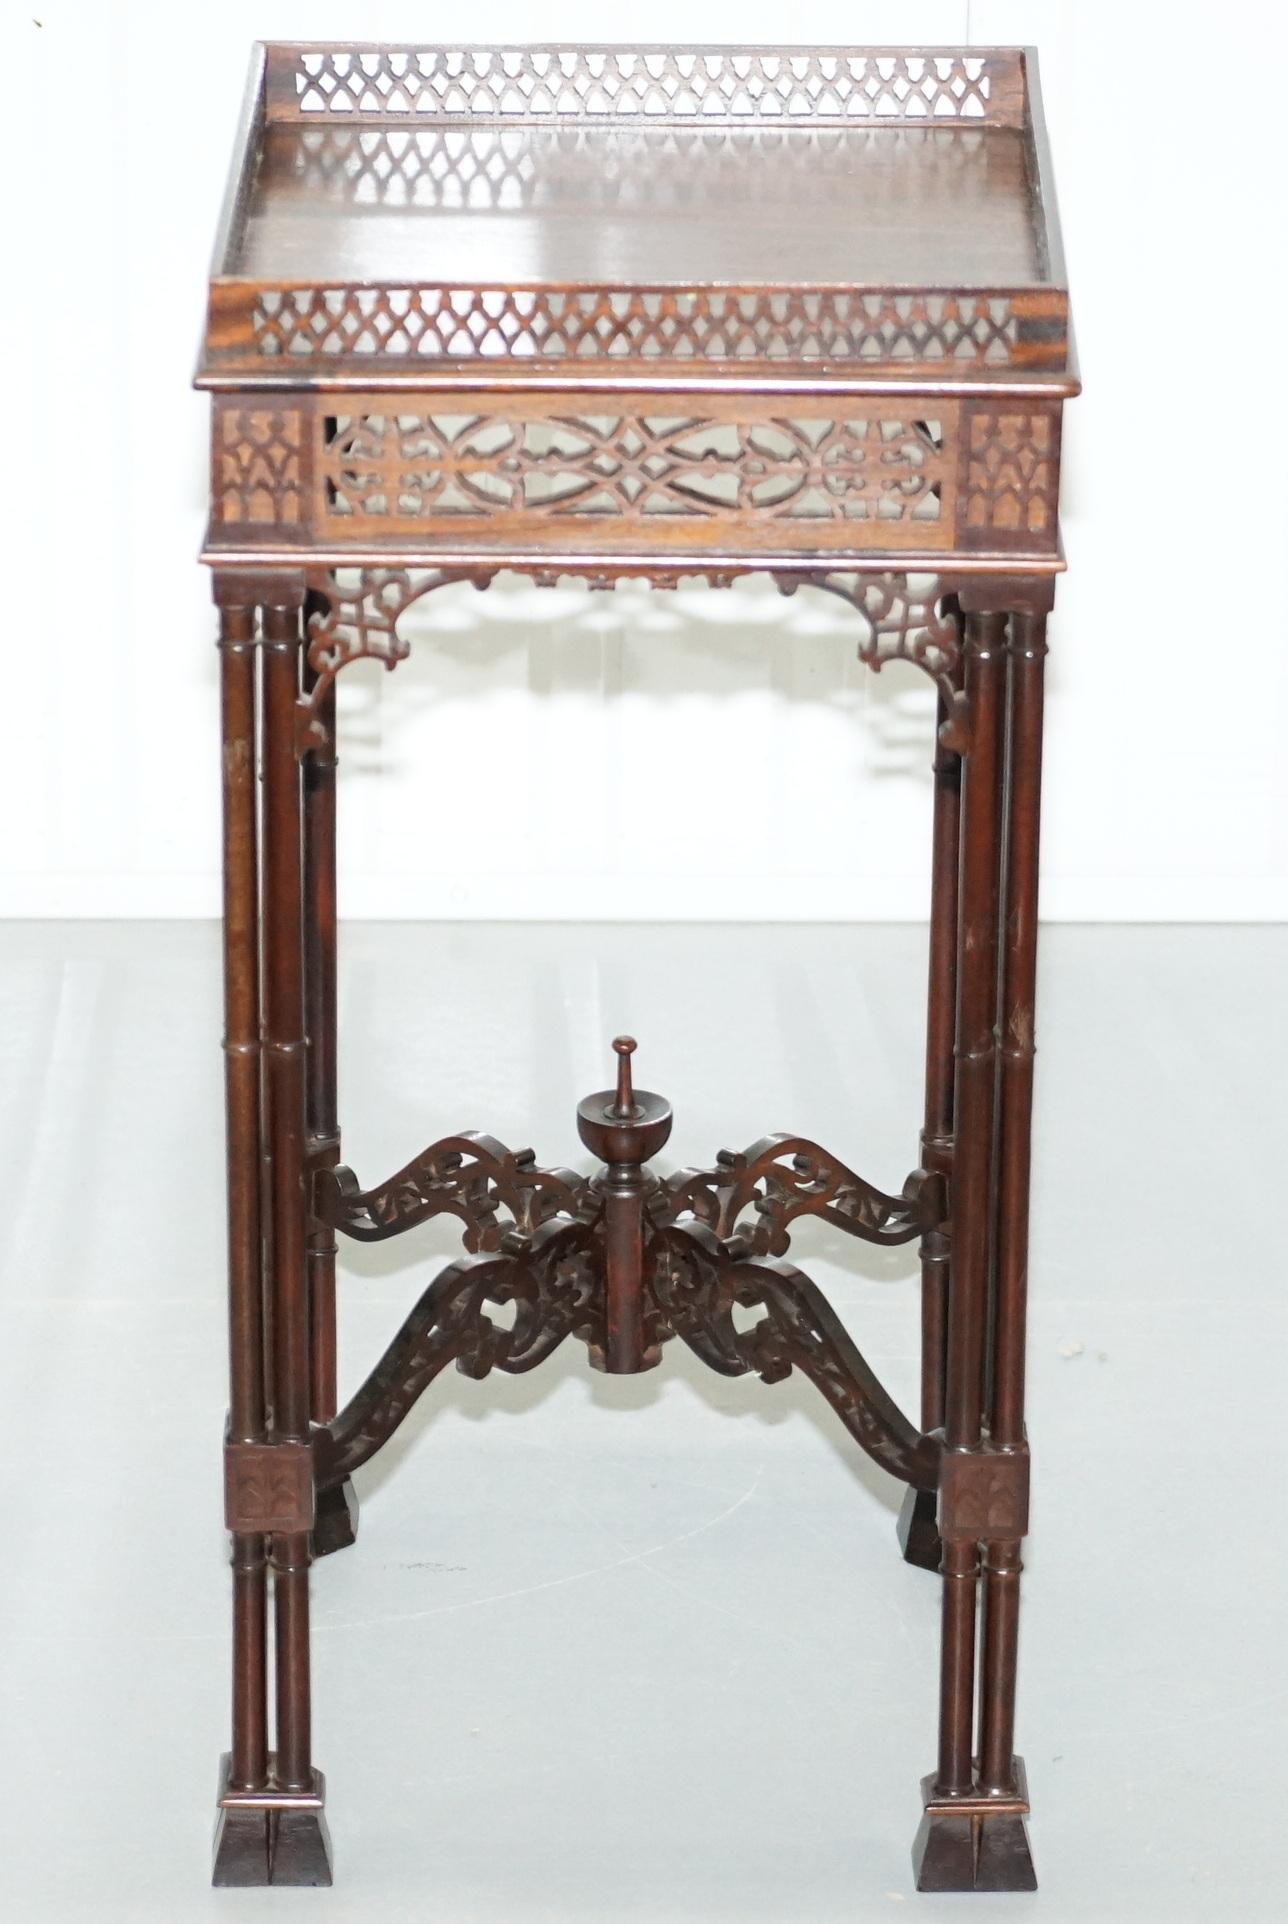 We are delighted to offer for sale this lovely mahogany Thomas Chippendale Chinese style carved display stand

A very famous style and design by Chippendale in the late 18th century, this is a revival version of the originals but expertly crafted,